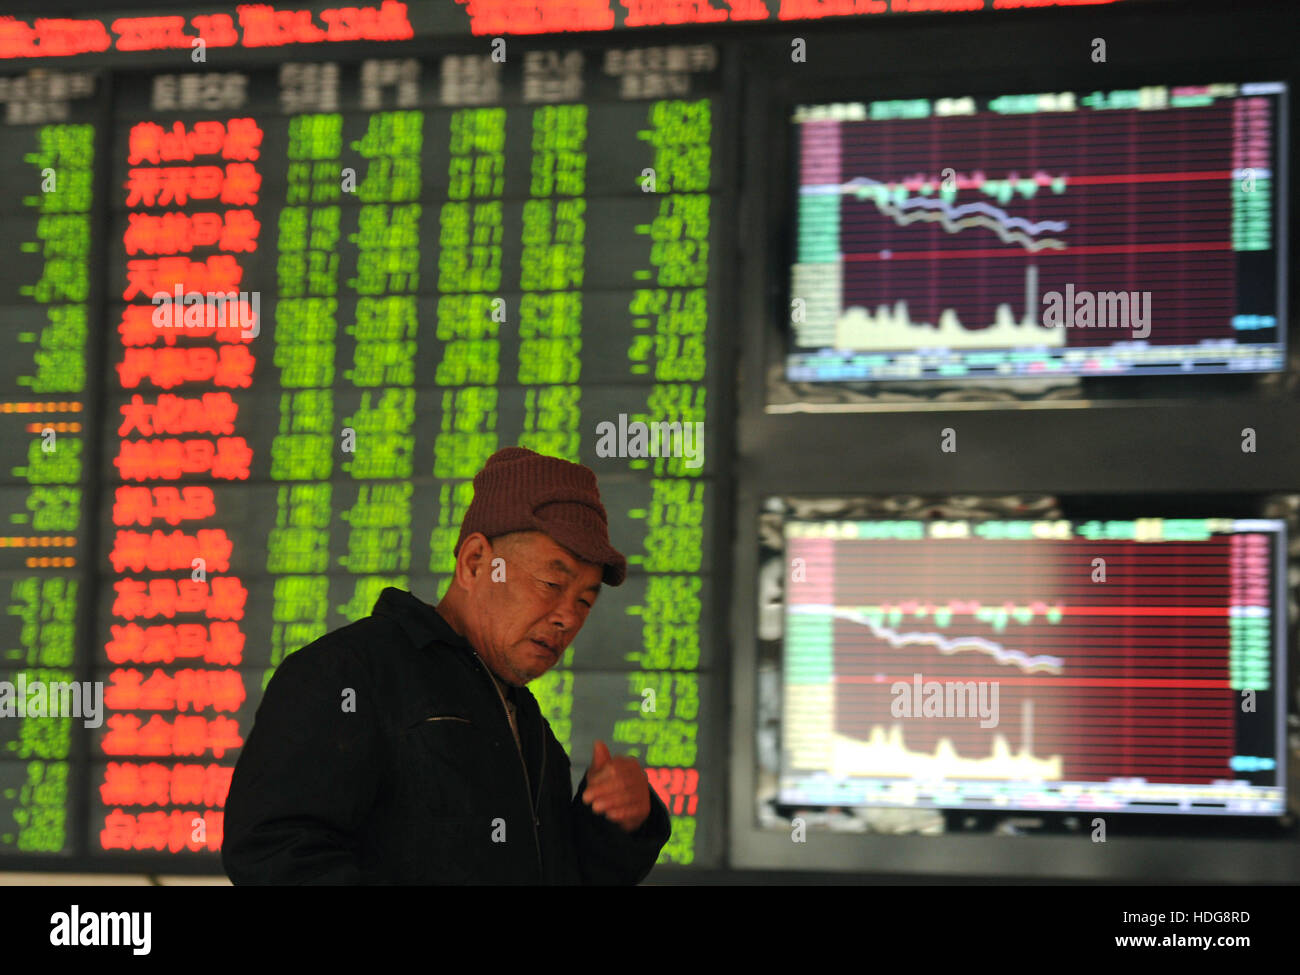 Fuyang. 12th Dec, 2016. A shareholder is seen at a stock market in Fuyang, east China's Anhui Province, Dec. 12, 2016. Chinese stocks tumbled on Monday as China's top insurance regulator continued to check the 'barbaric' behavior of insurers to control financial risks brought about by speculative stake buyouts. The benchmark Shanghai Composite Index dropped 2.47 percent to close at 3,152.97 points. © Xinhua/Alamy Live News Stock Photo